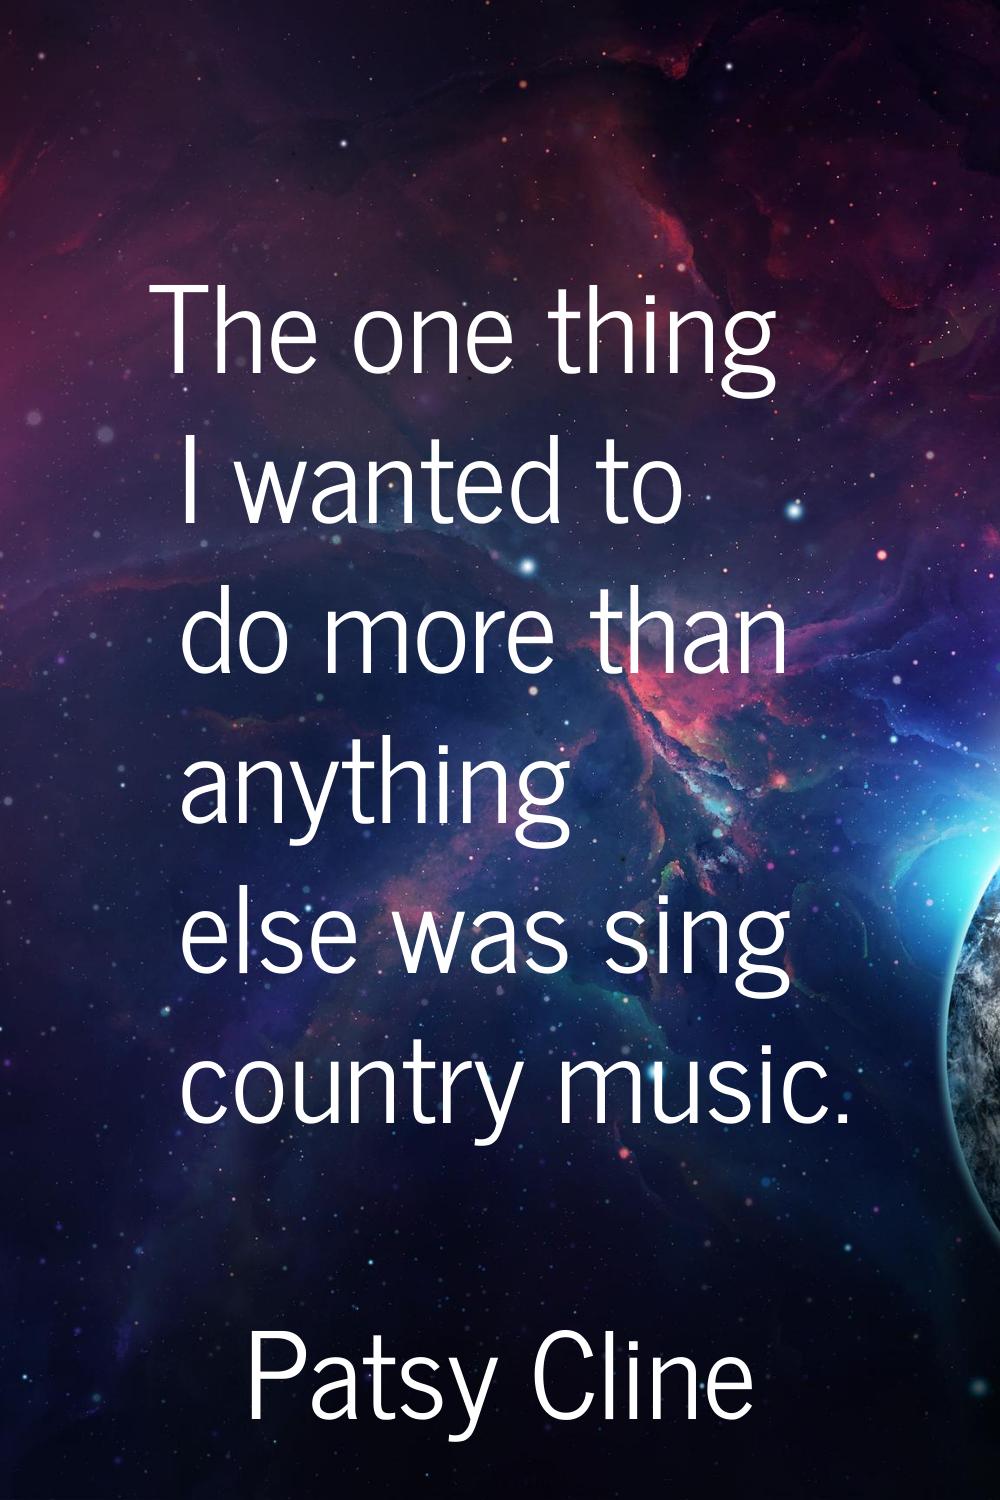 The one thing I wanted to do more than anything else was sing country music.